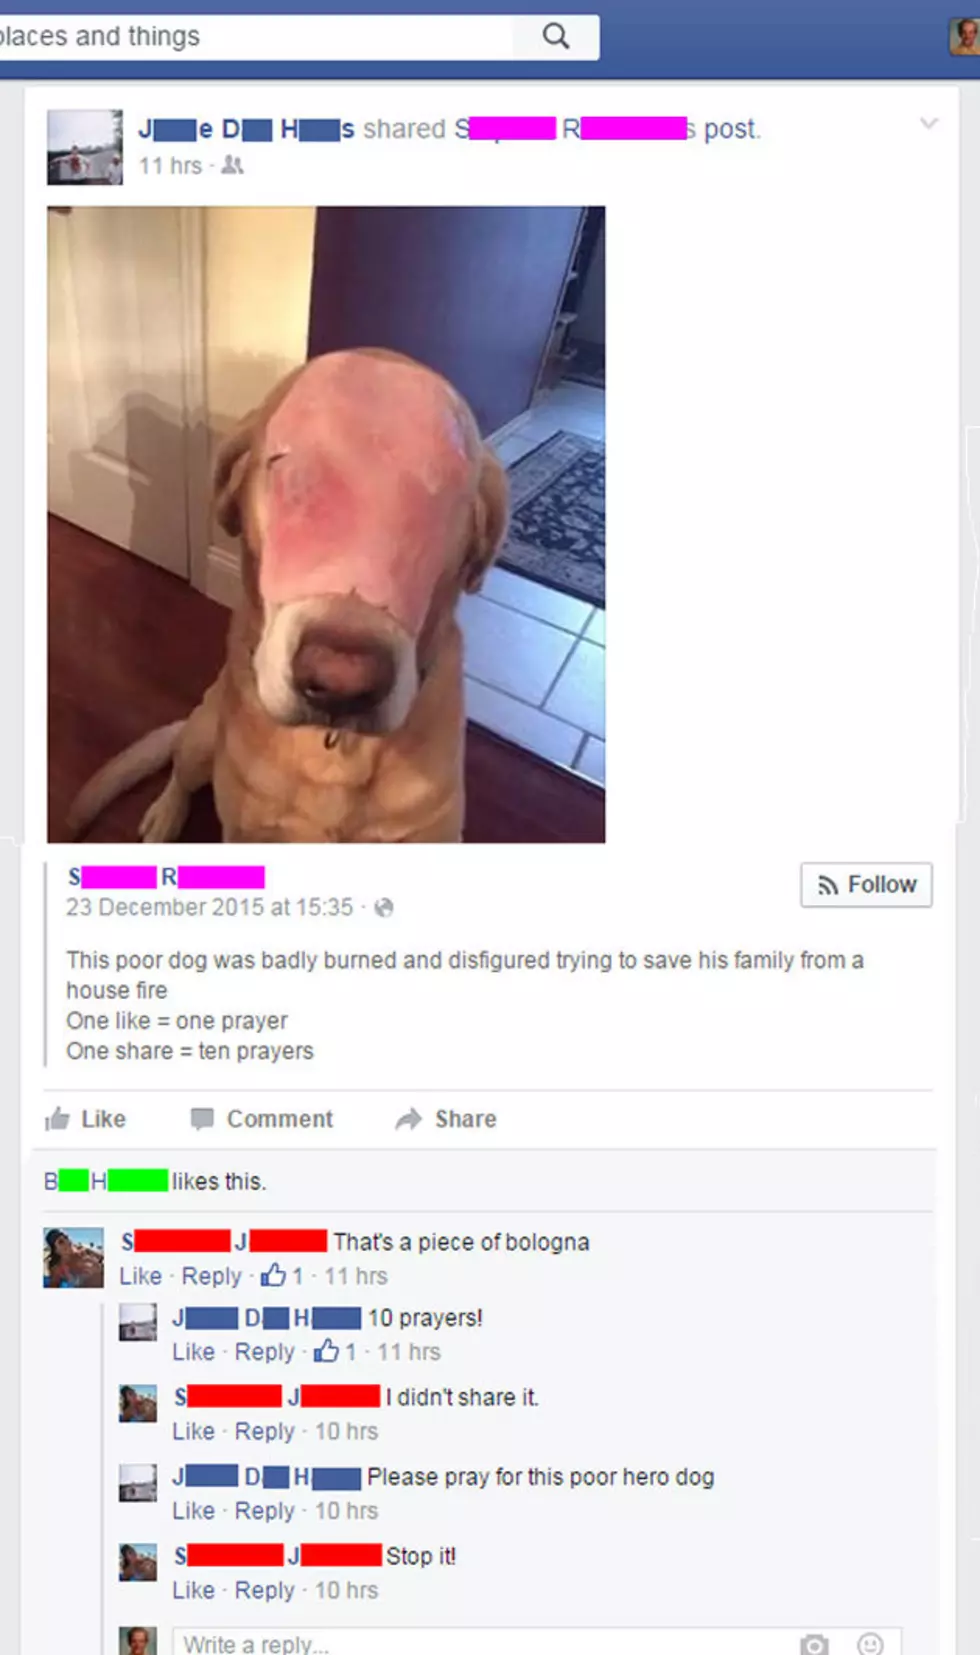 Watch How People React To This Picture Of An Injured Dog